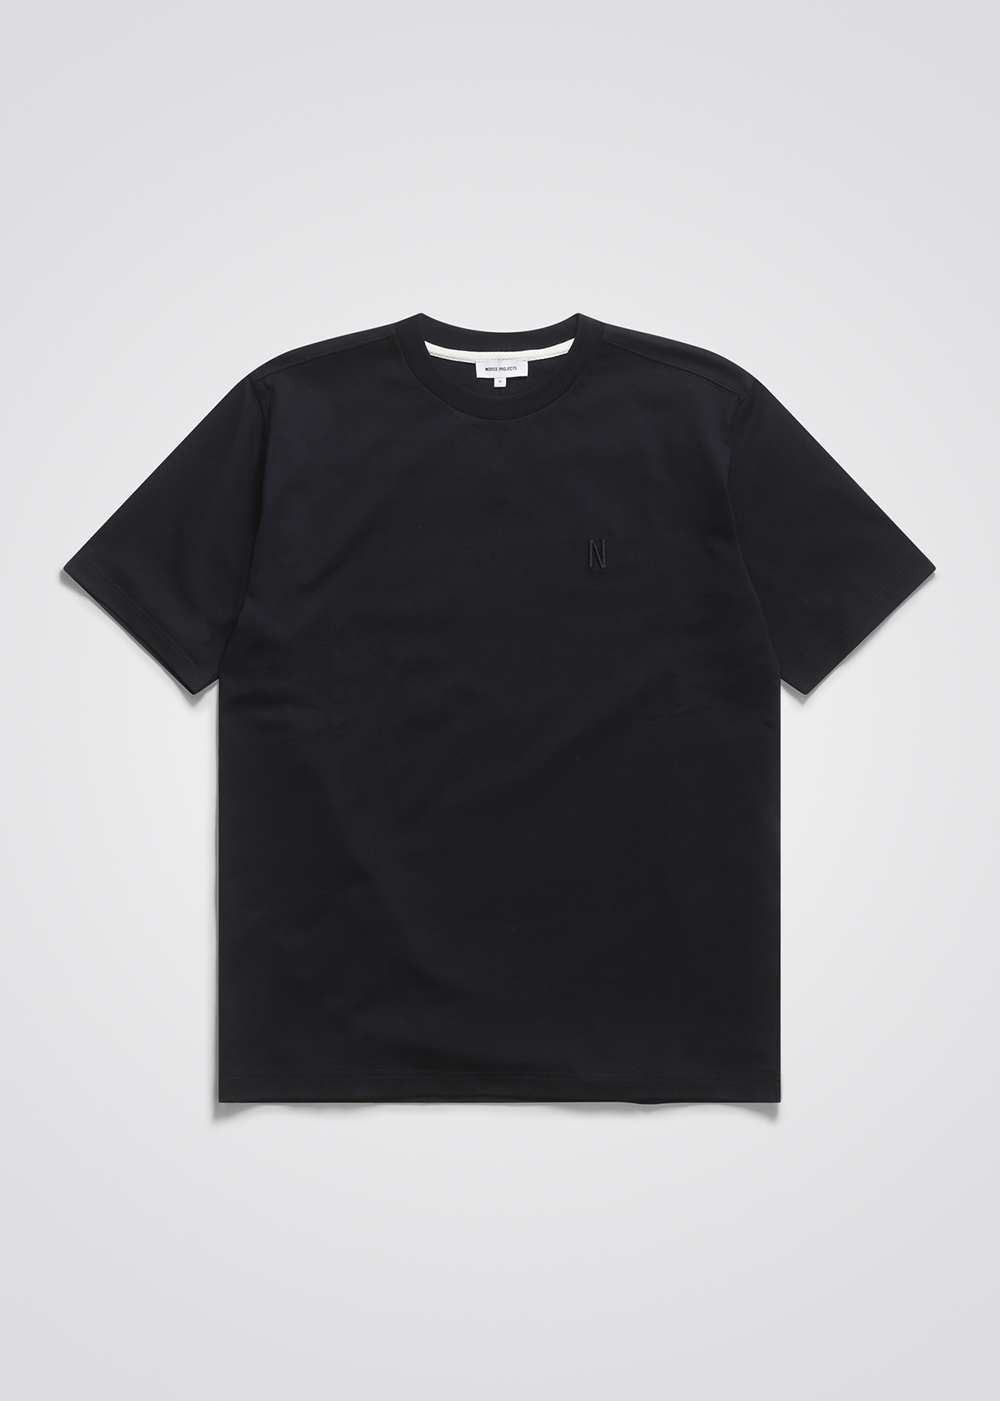 Front view of the Johannes Organic T-Shirt by Norse Projects in black